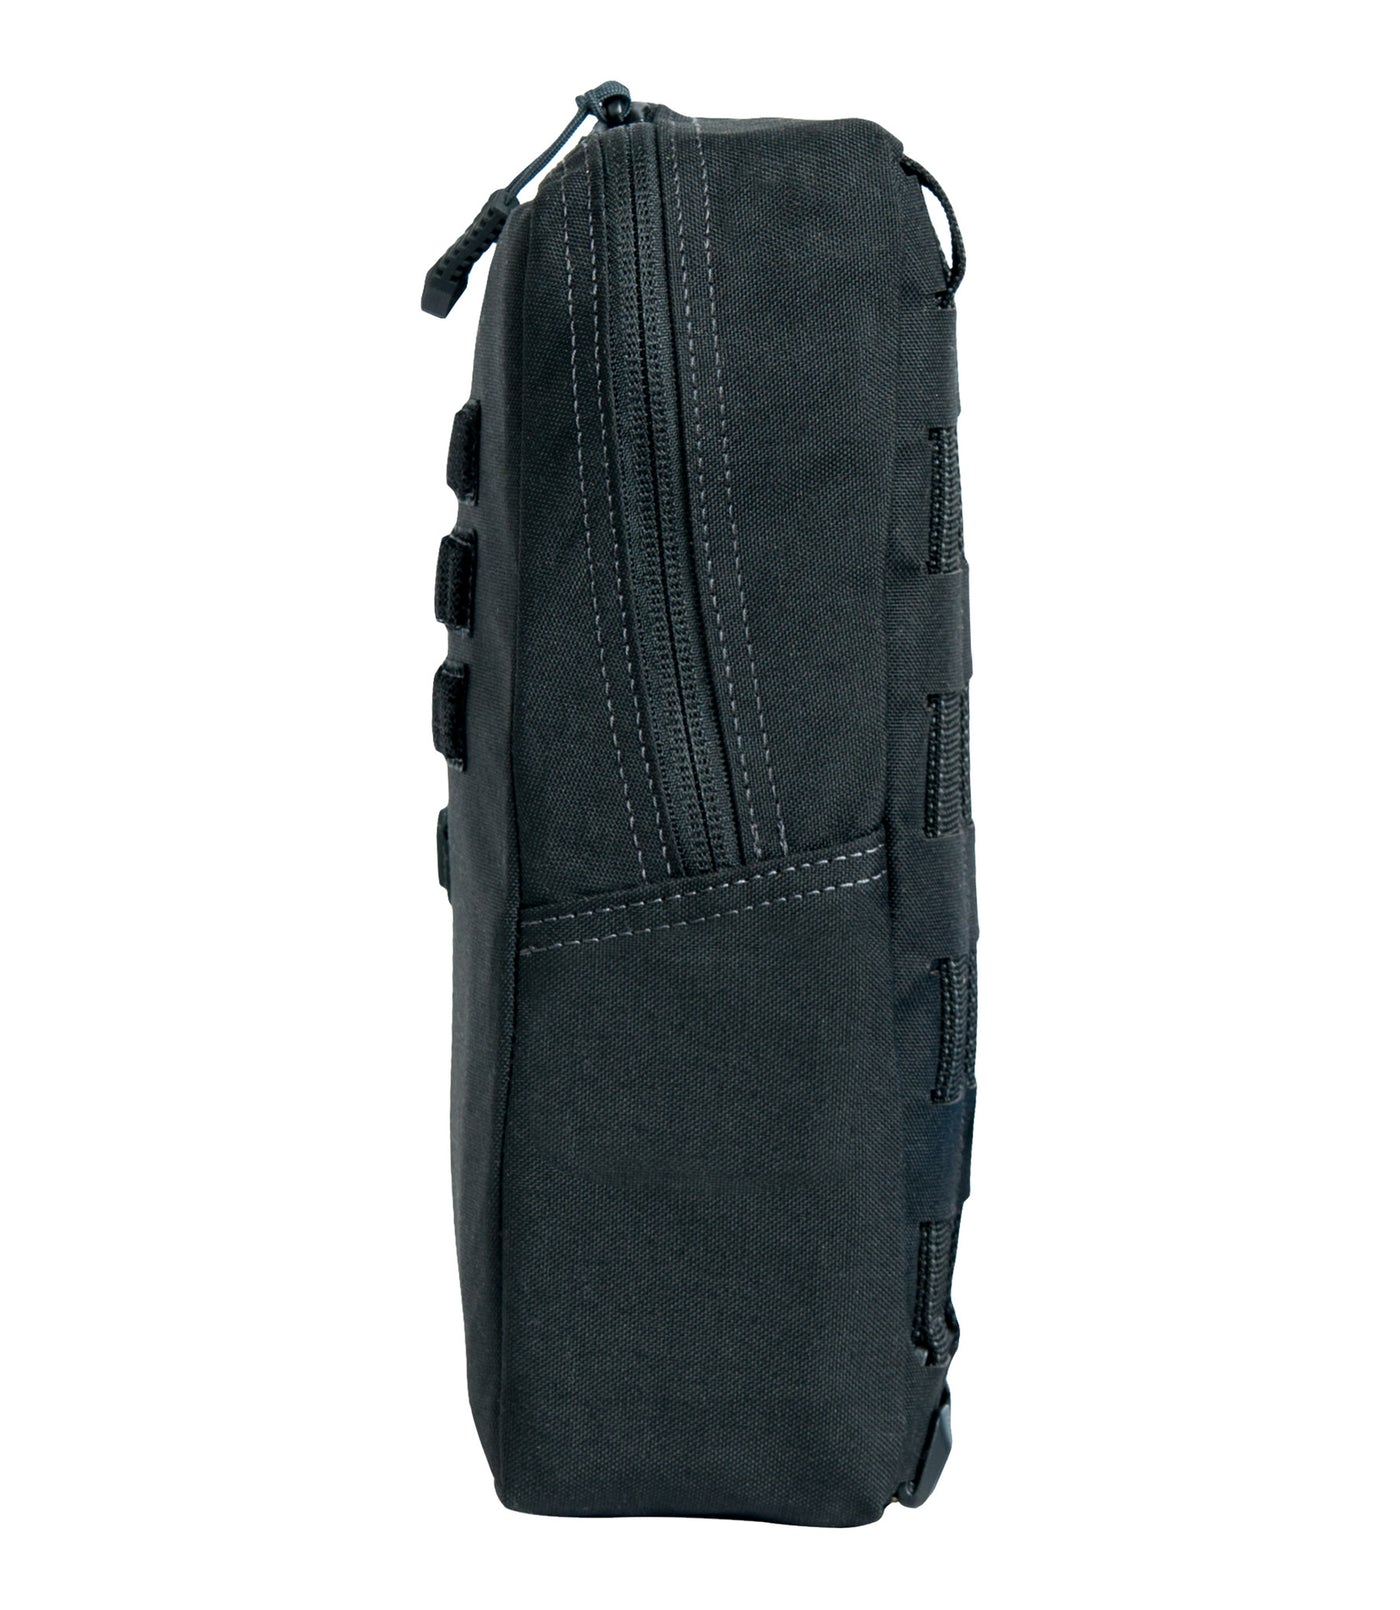 Side of Tactix Series 6x10 Utility Pouch in Black